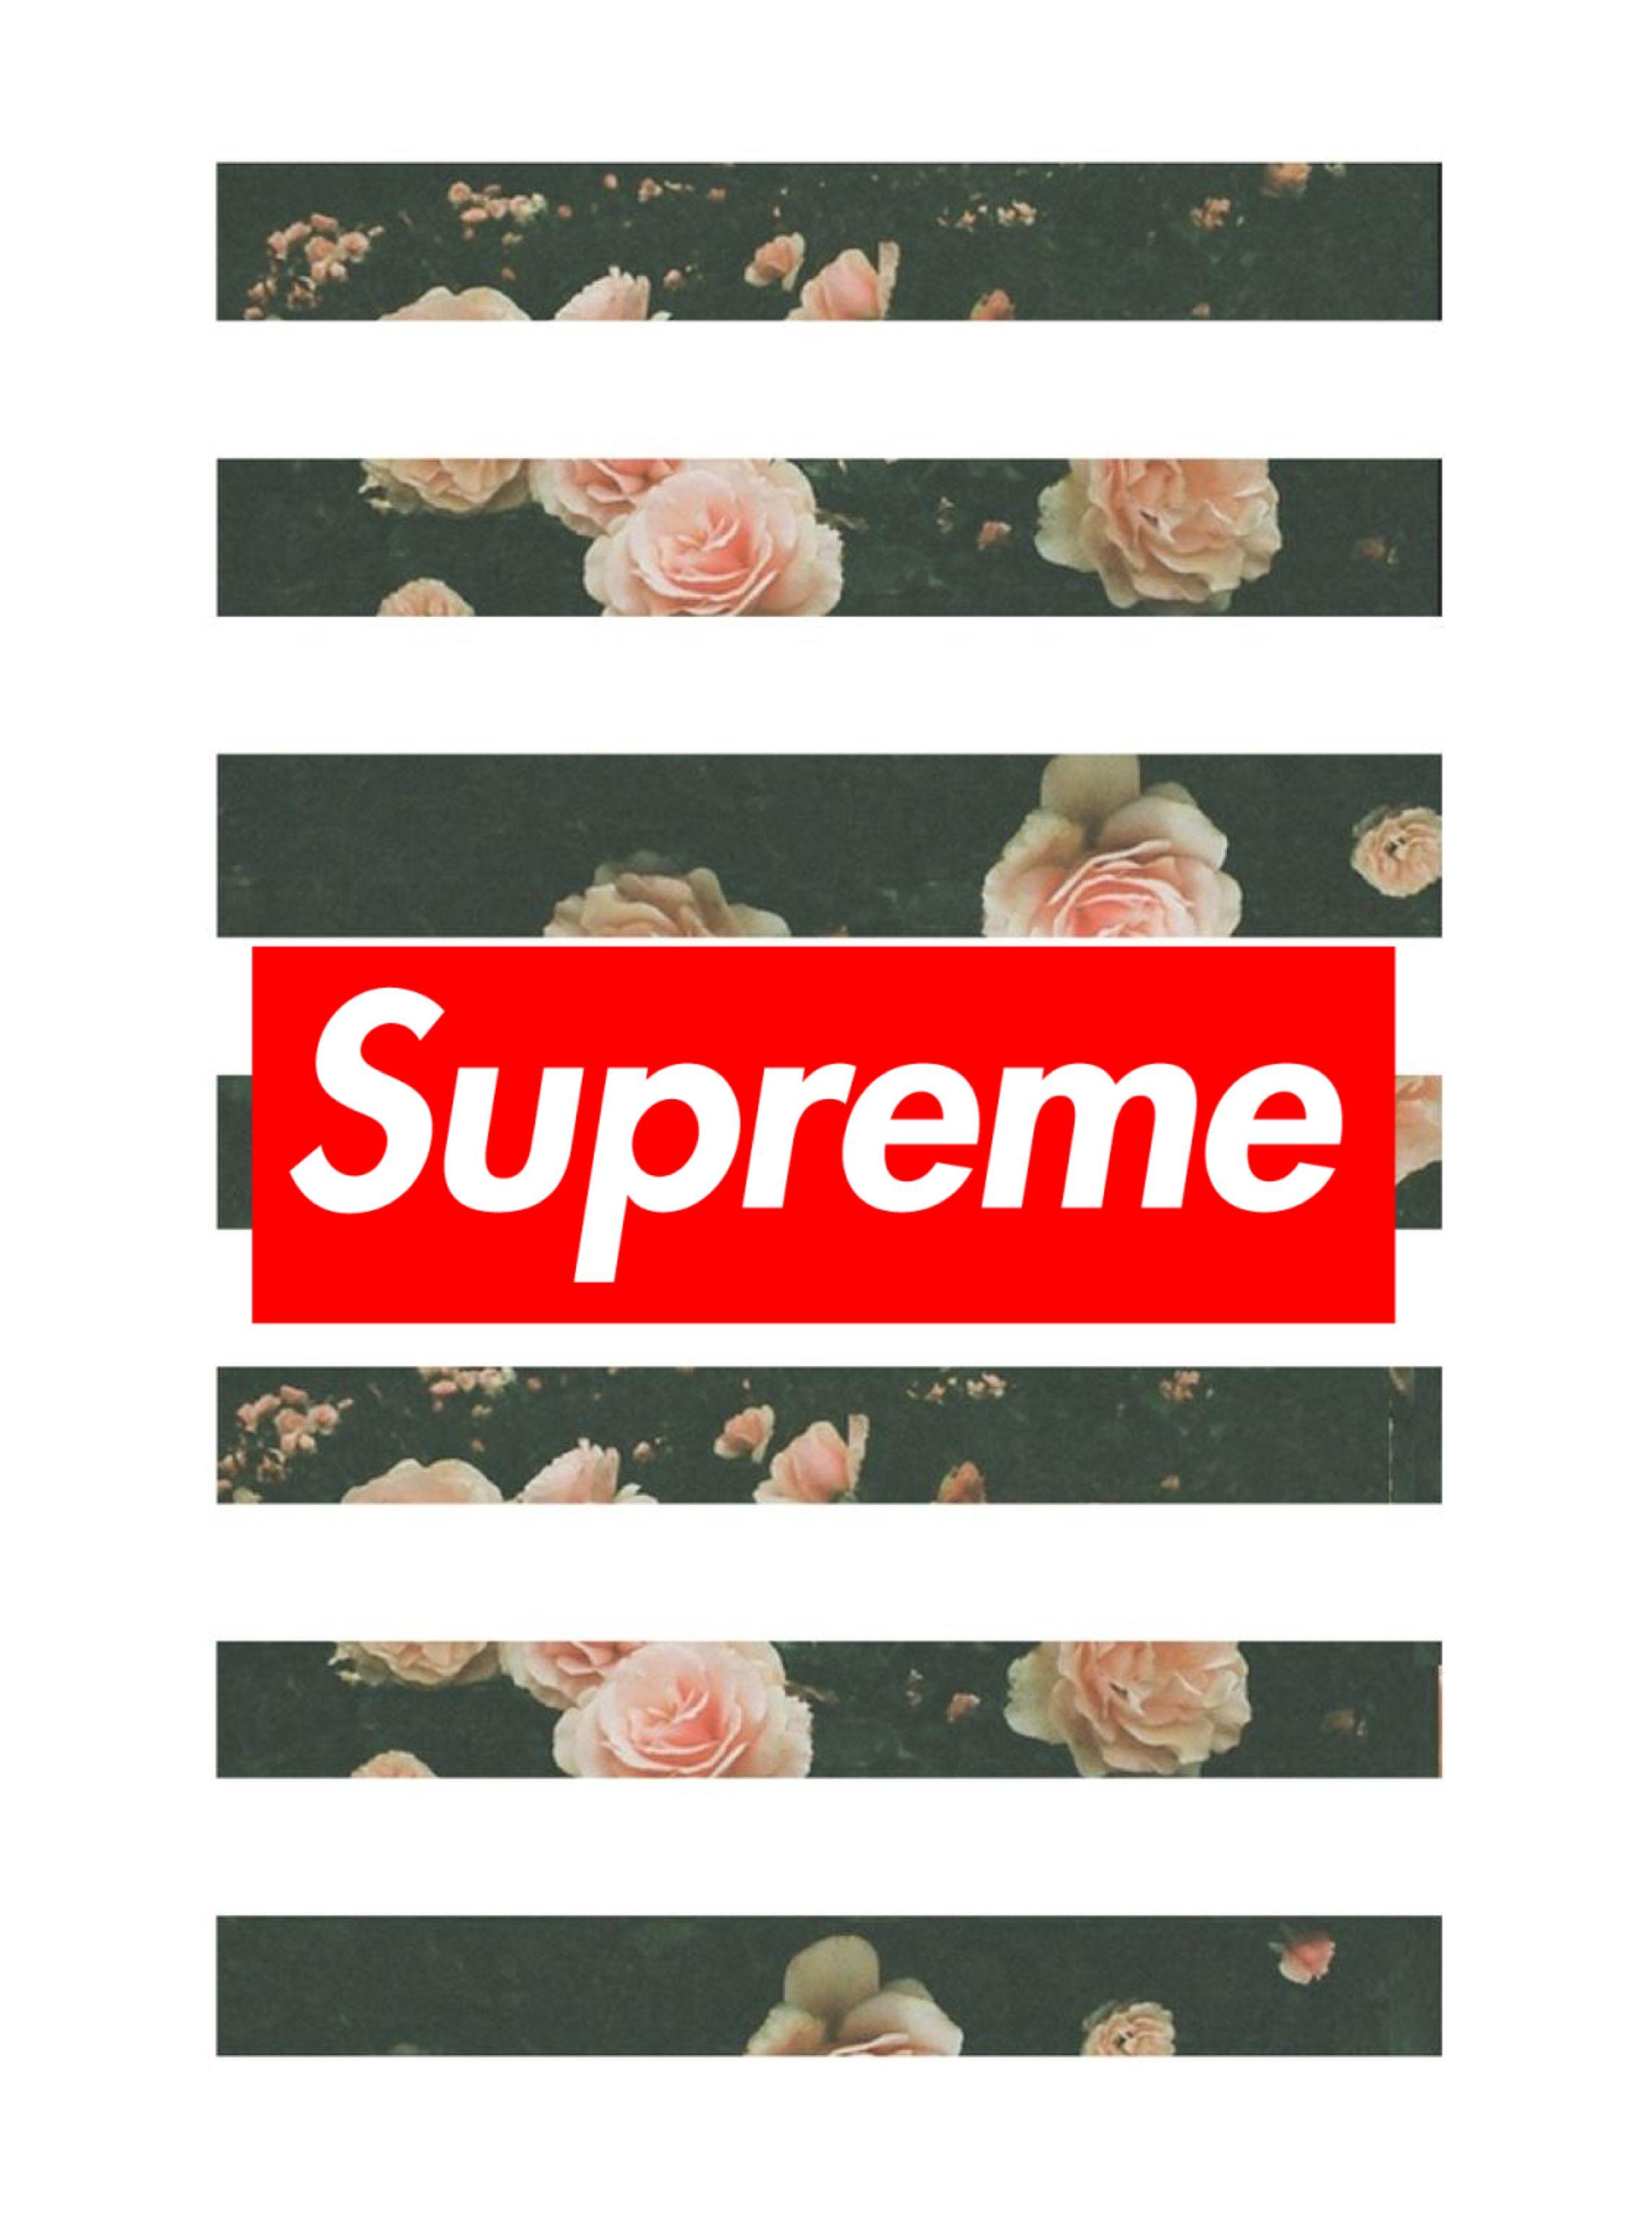 Download Supreme wallpaper by michmizuki0412 now. Browse millions of  popular black wallpapers an…